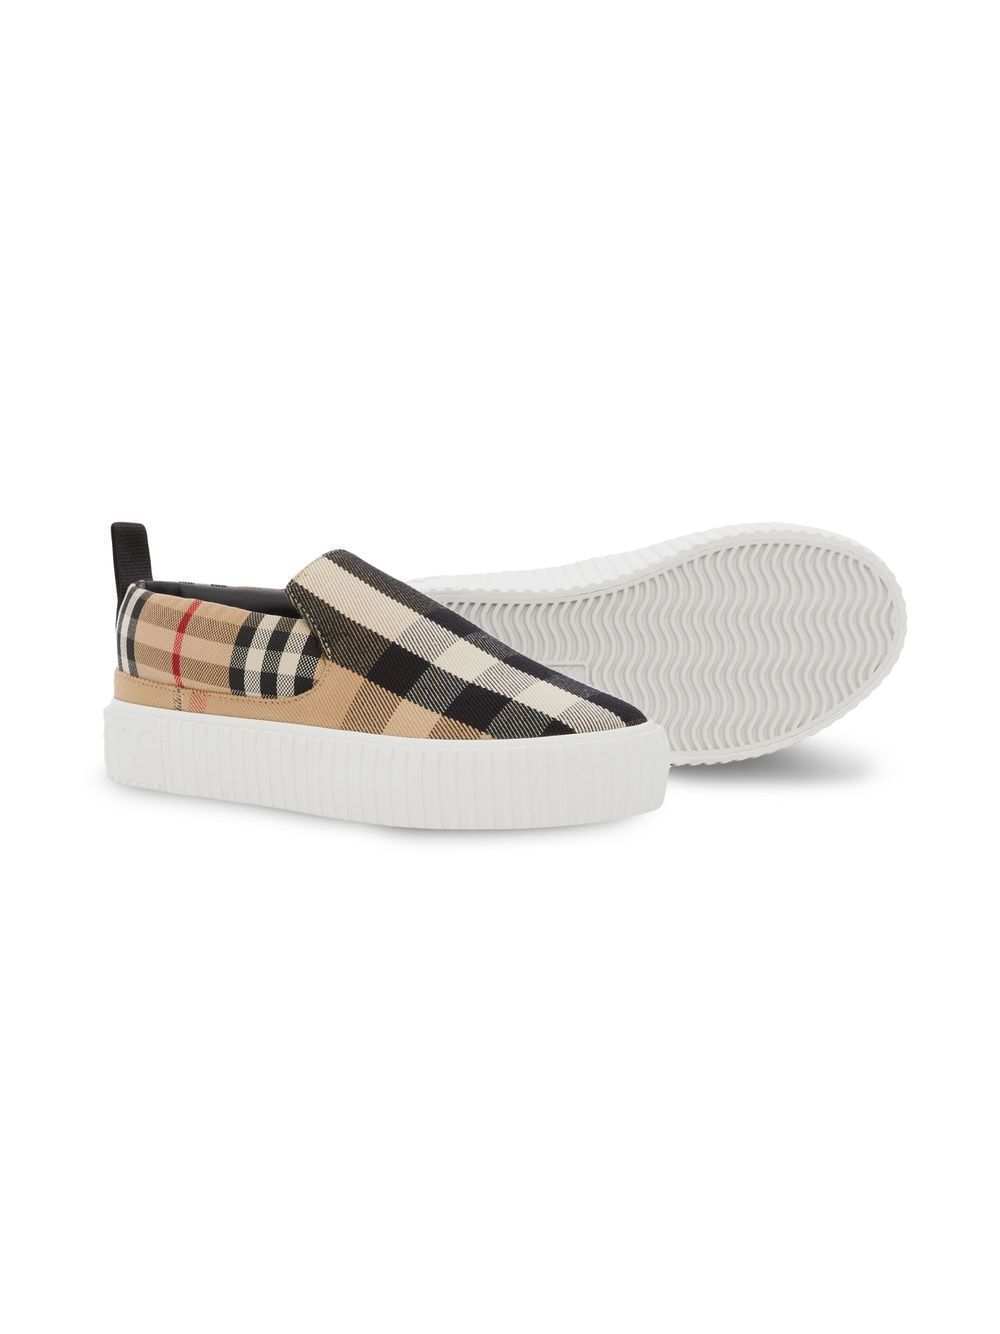 Image 2 of Burberry Kids check cotton sneakers